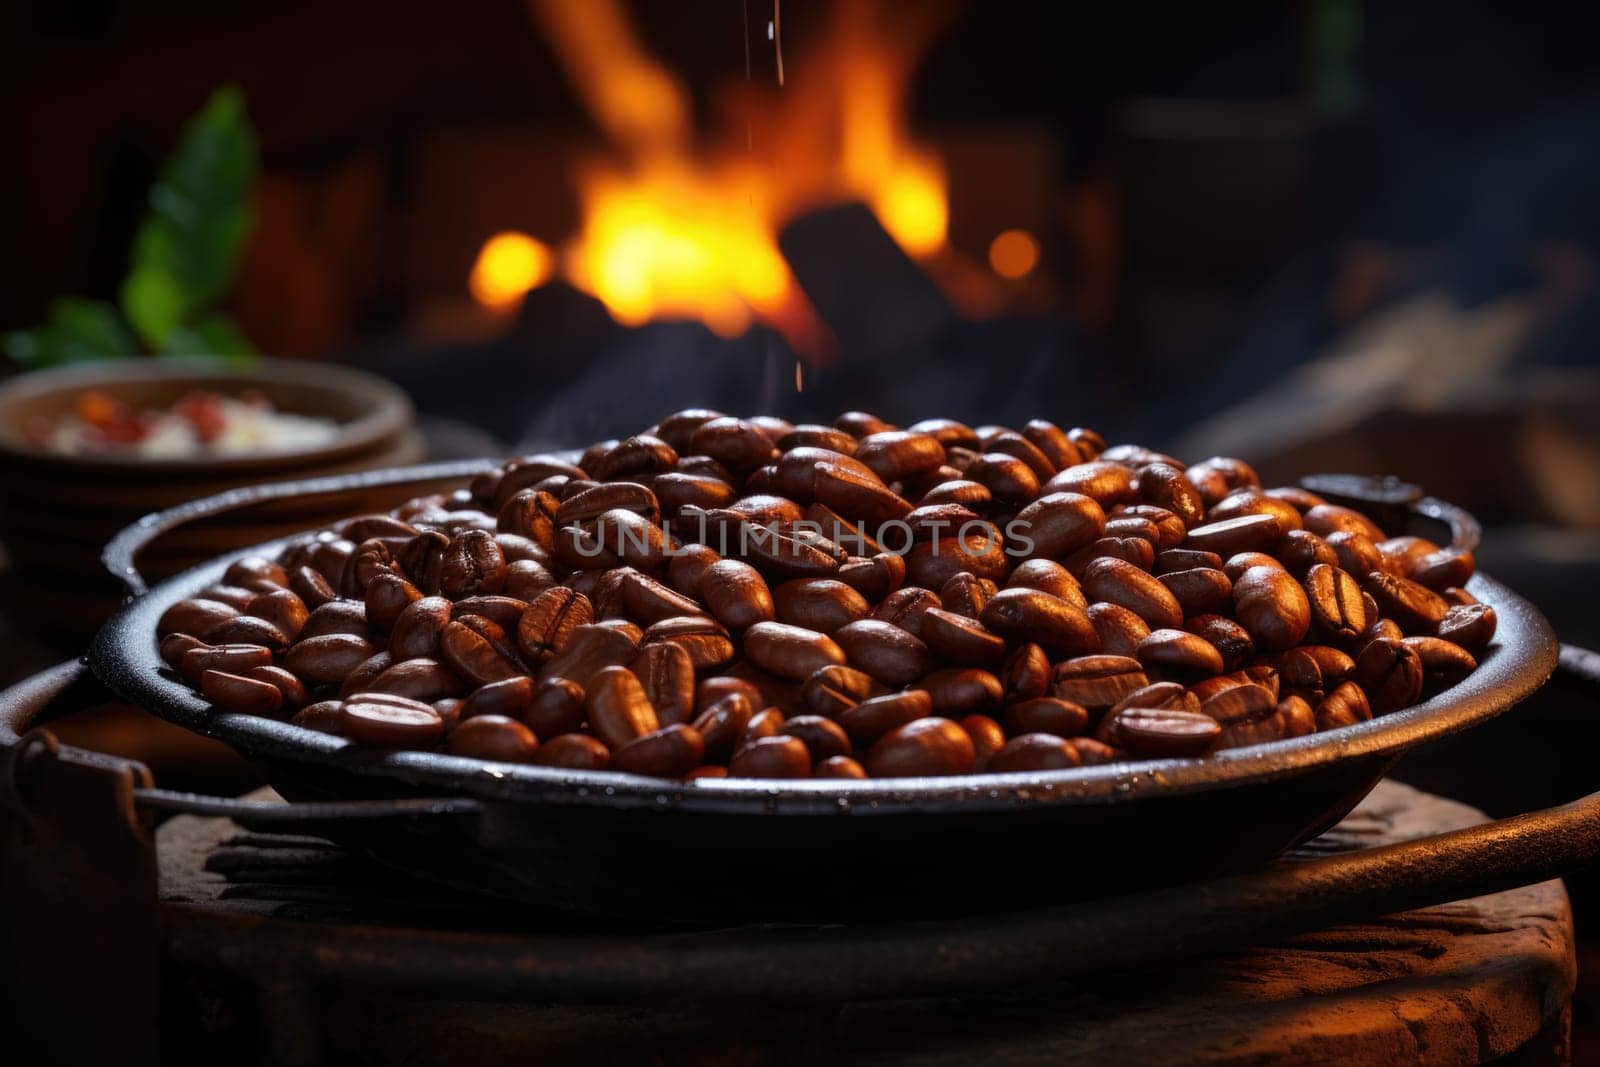 Roasted coffee beans close-up in dishes . Colombian coffee by Lobachad